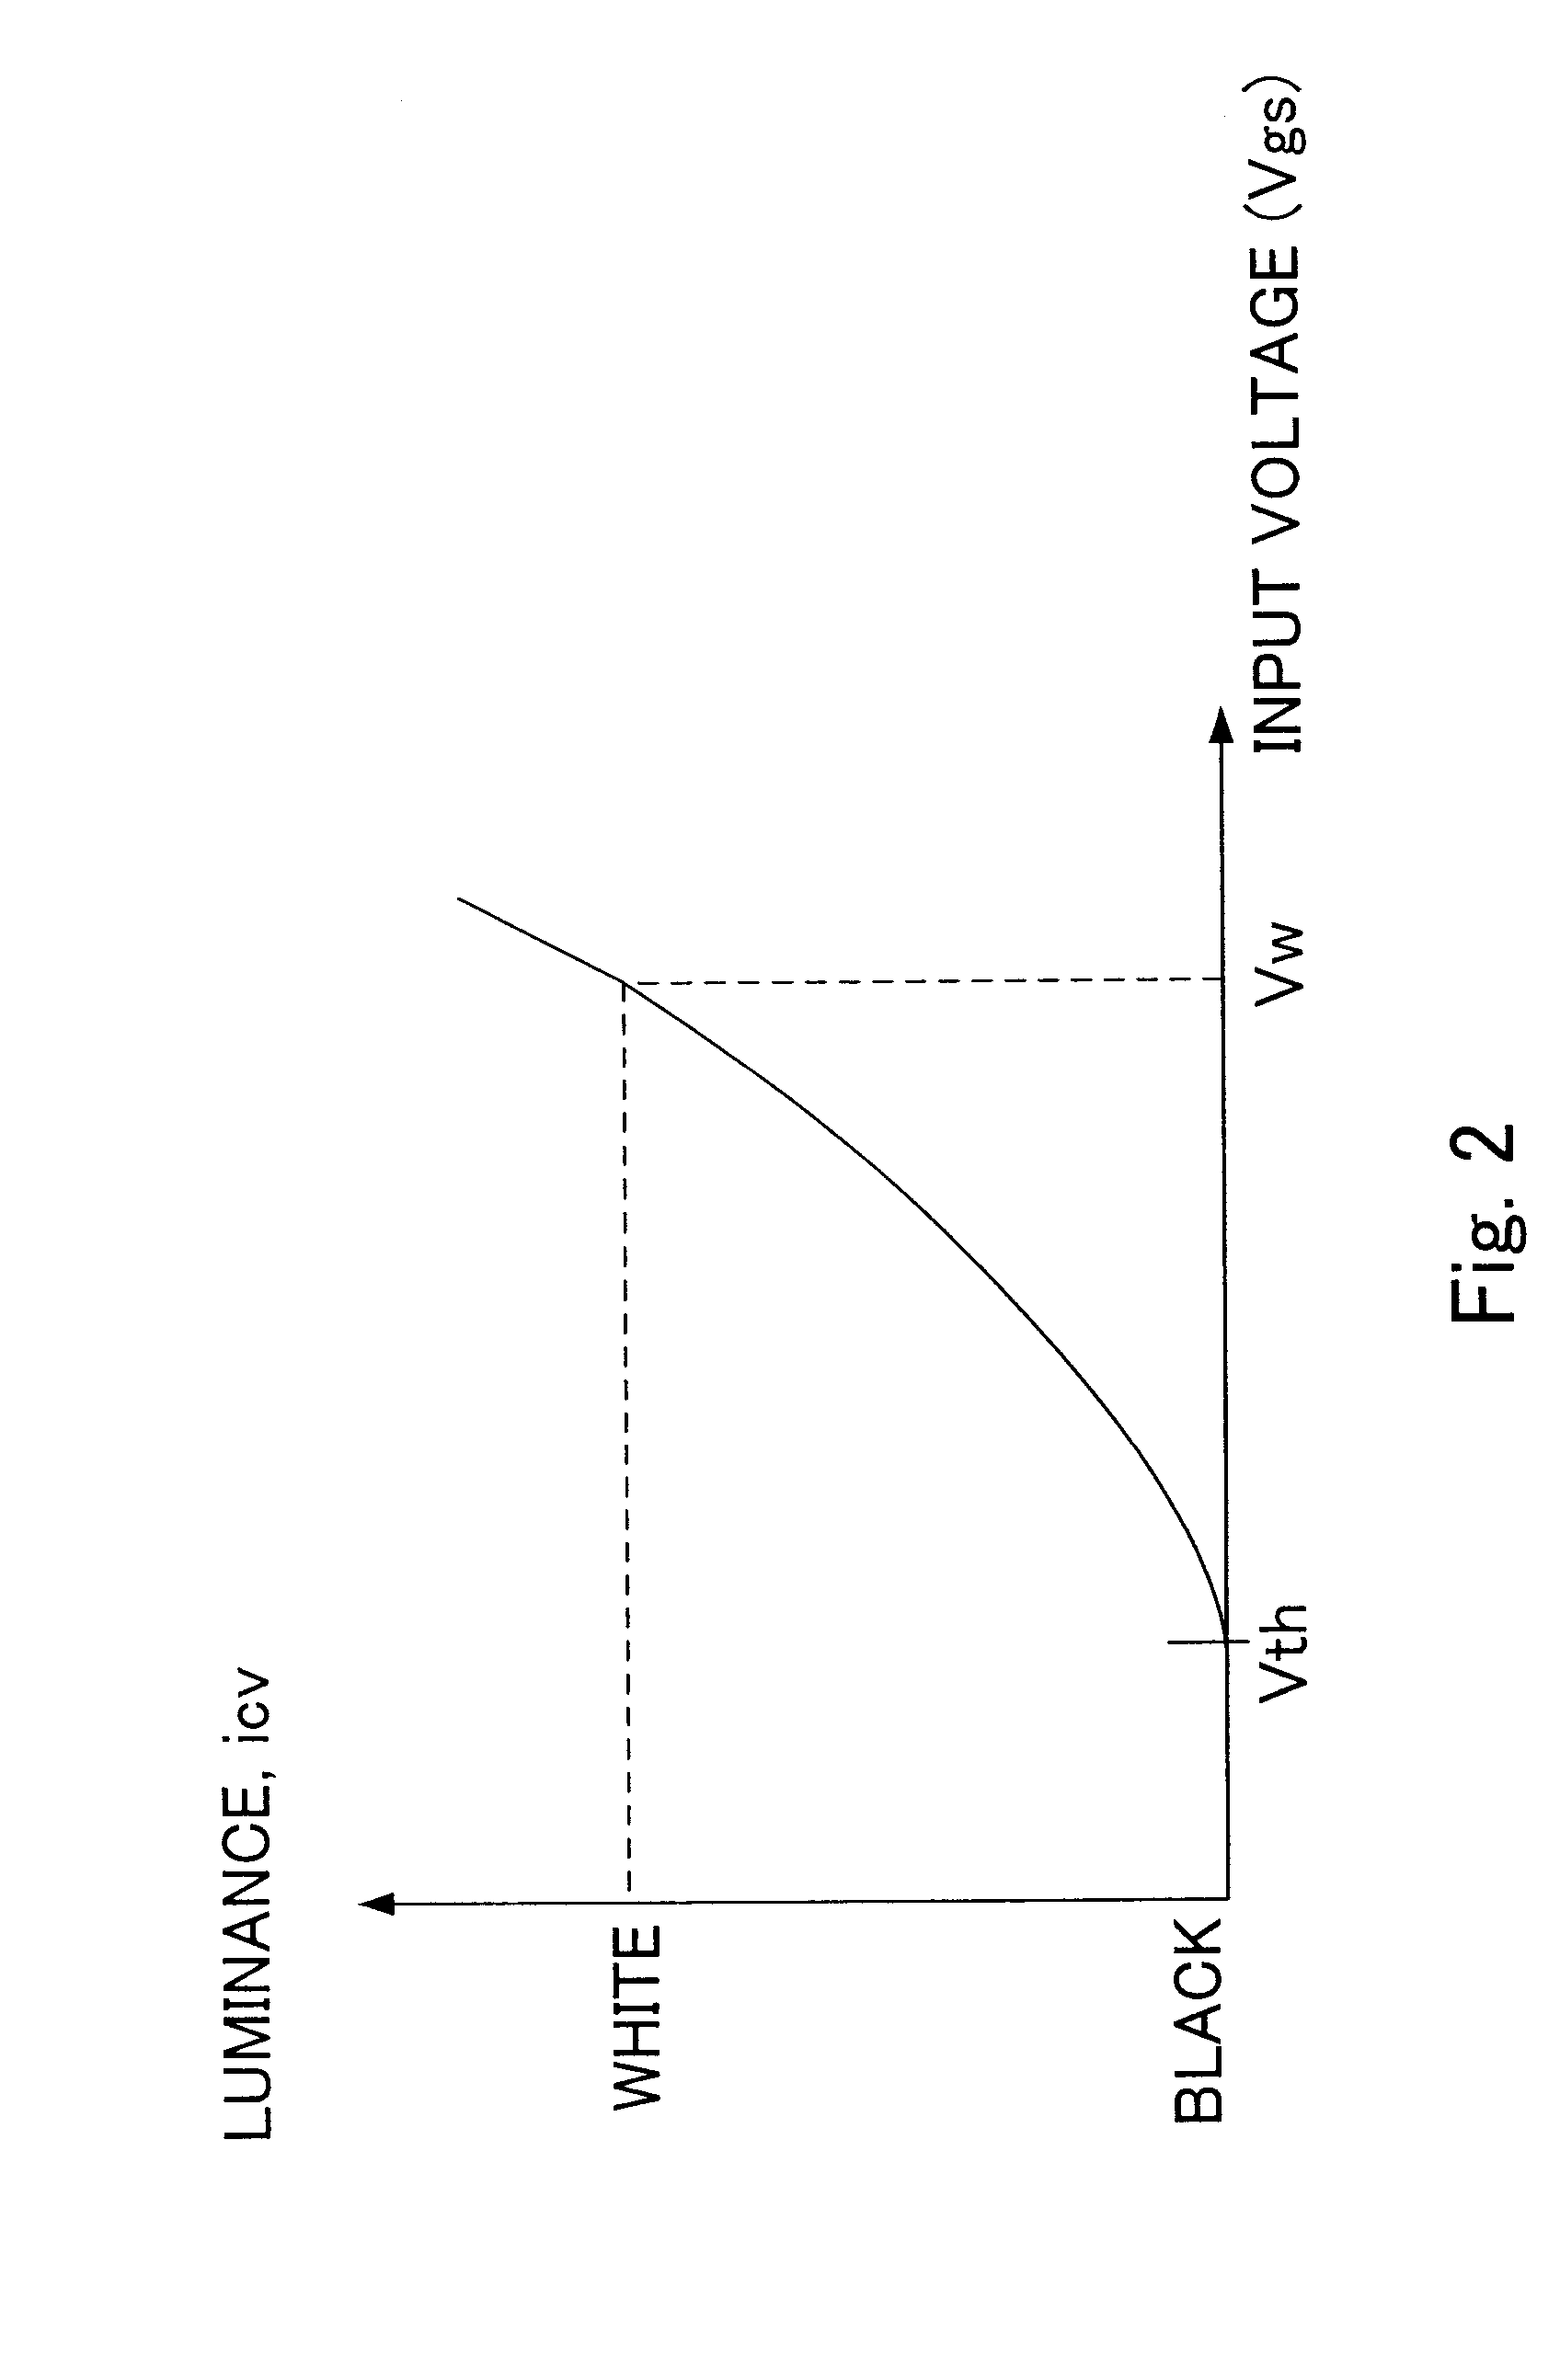 Assuring uniformity in the output of an OLED